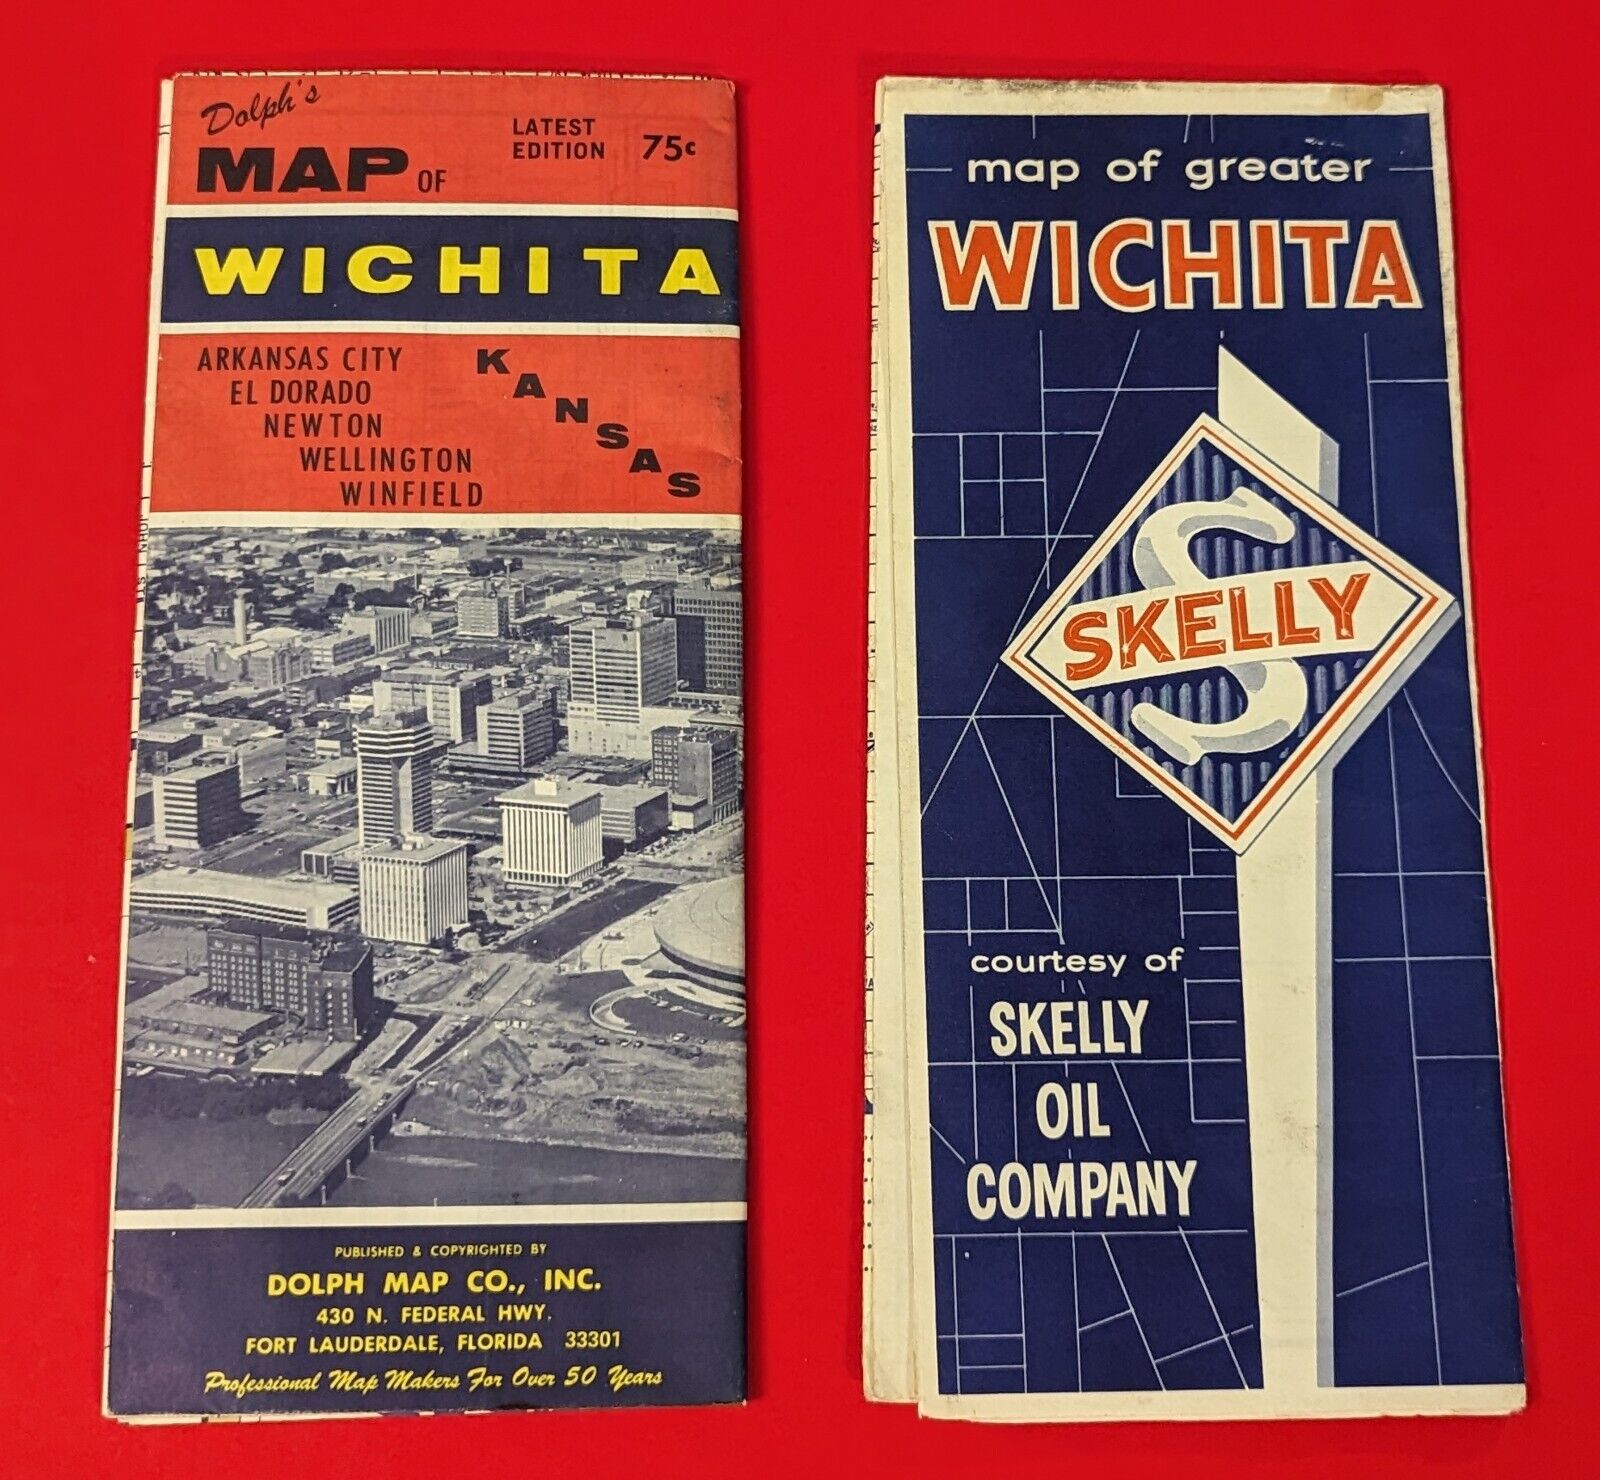 VTG Wichita Road Maps - Skelly Oil Co. 1964 + Dolph's - 60s Midwest City Kansas